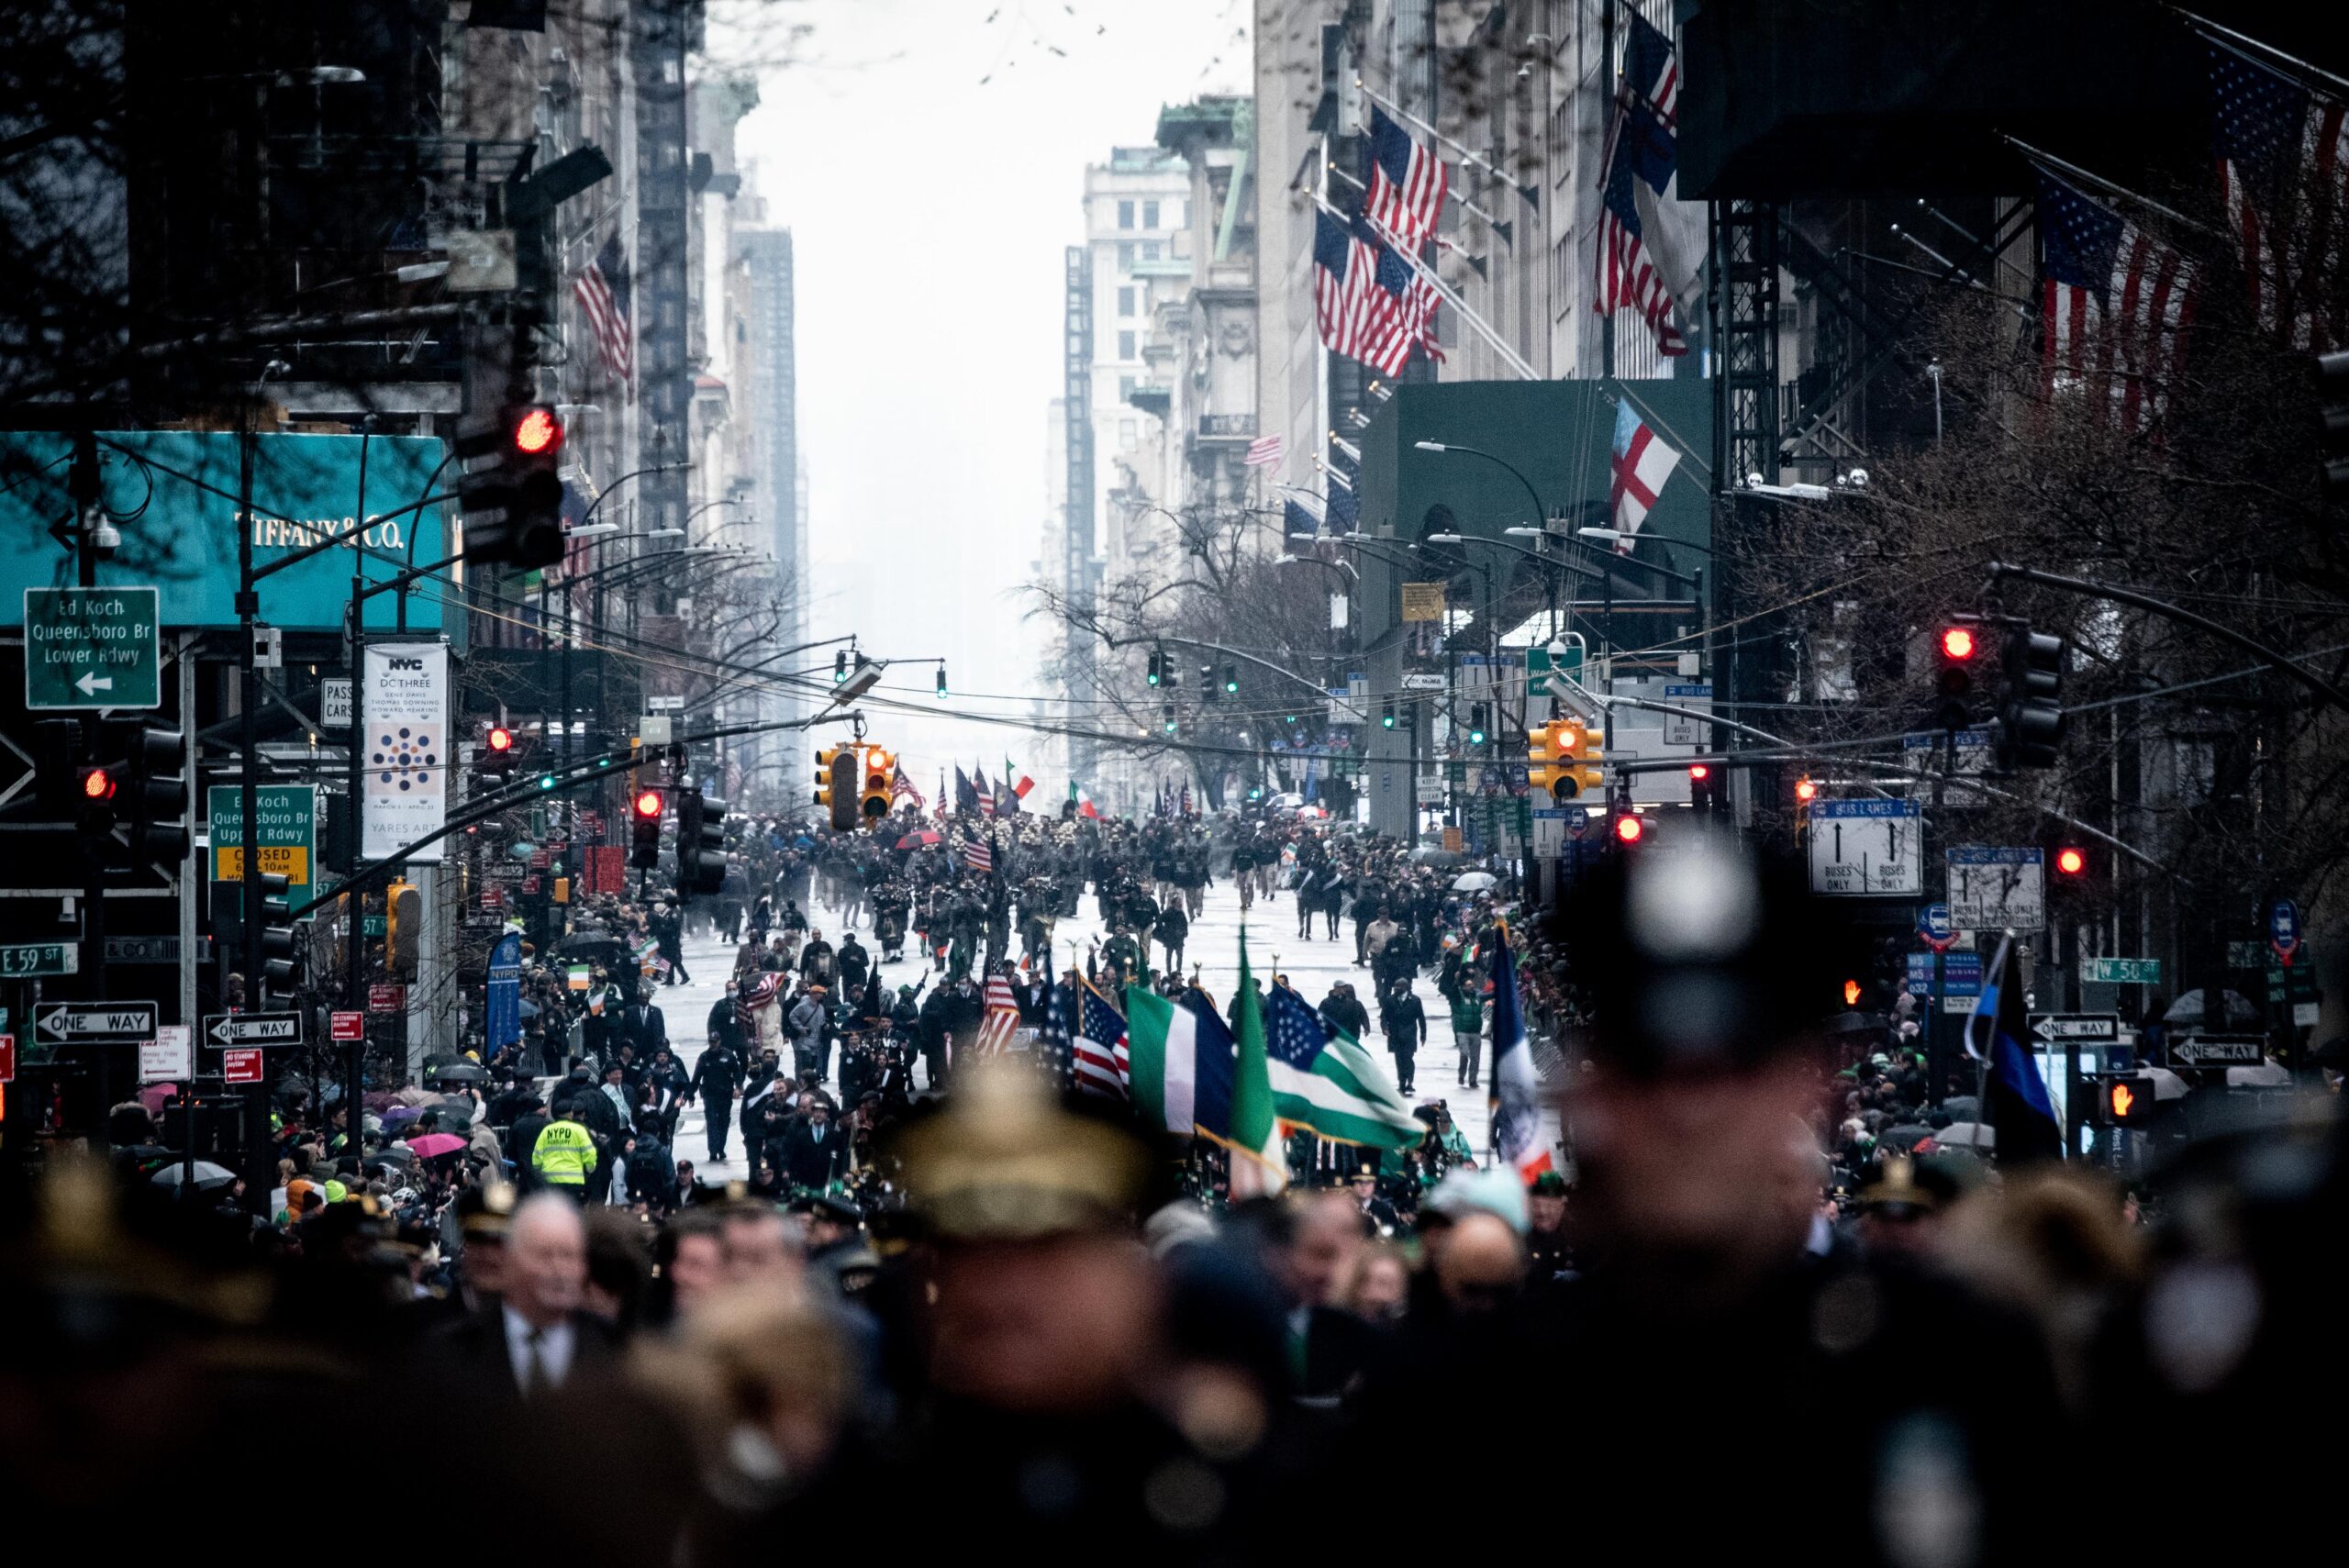 St. Patrick’s Day Parade on Fifth Avenue in Manhattan on Thursday, March 17, 2022. Michael Appleton/Mayoral Photography Office